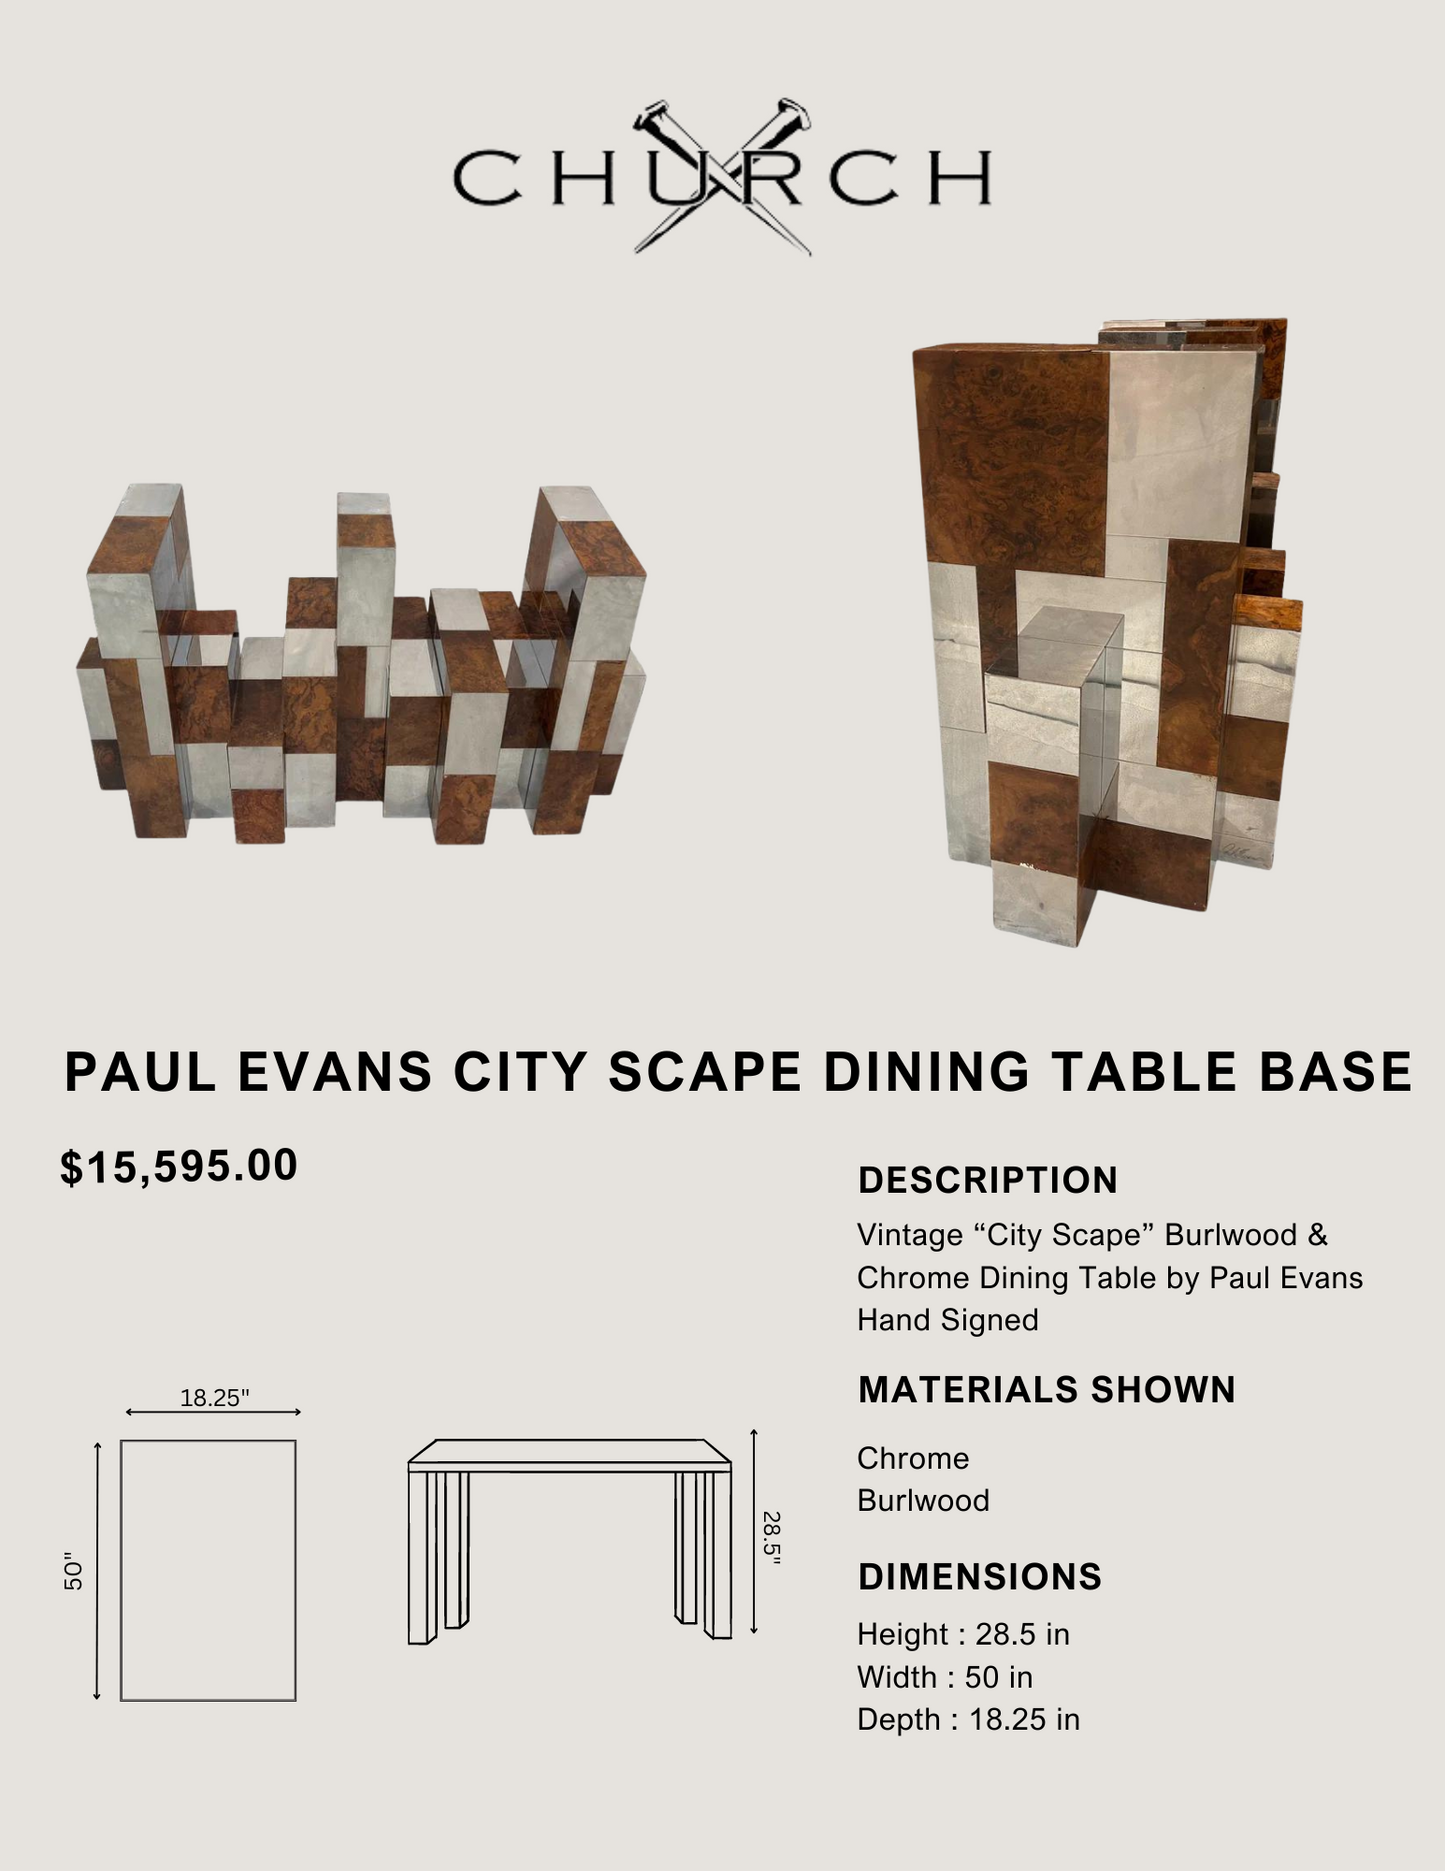 Paul Evans City Scape Dining Table Base